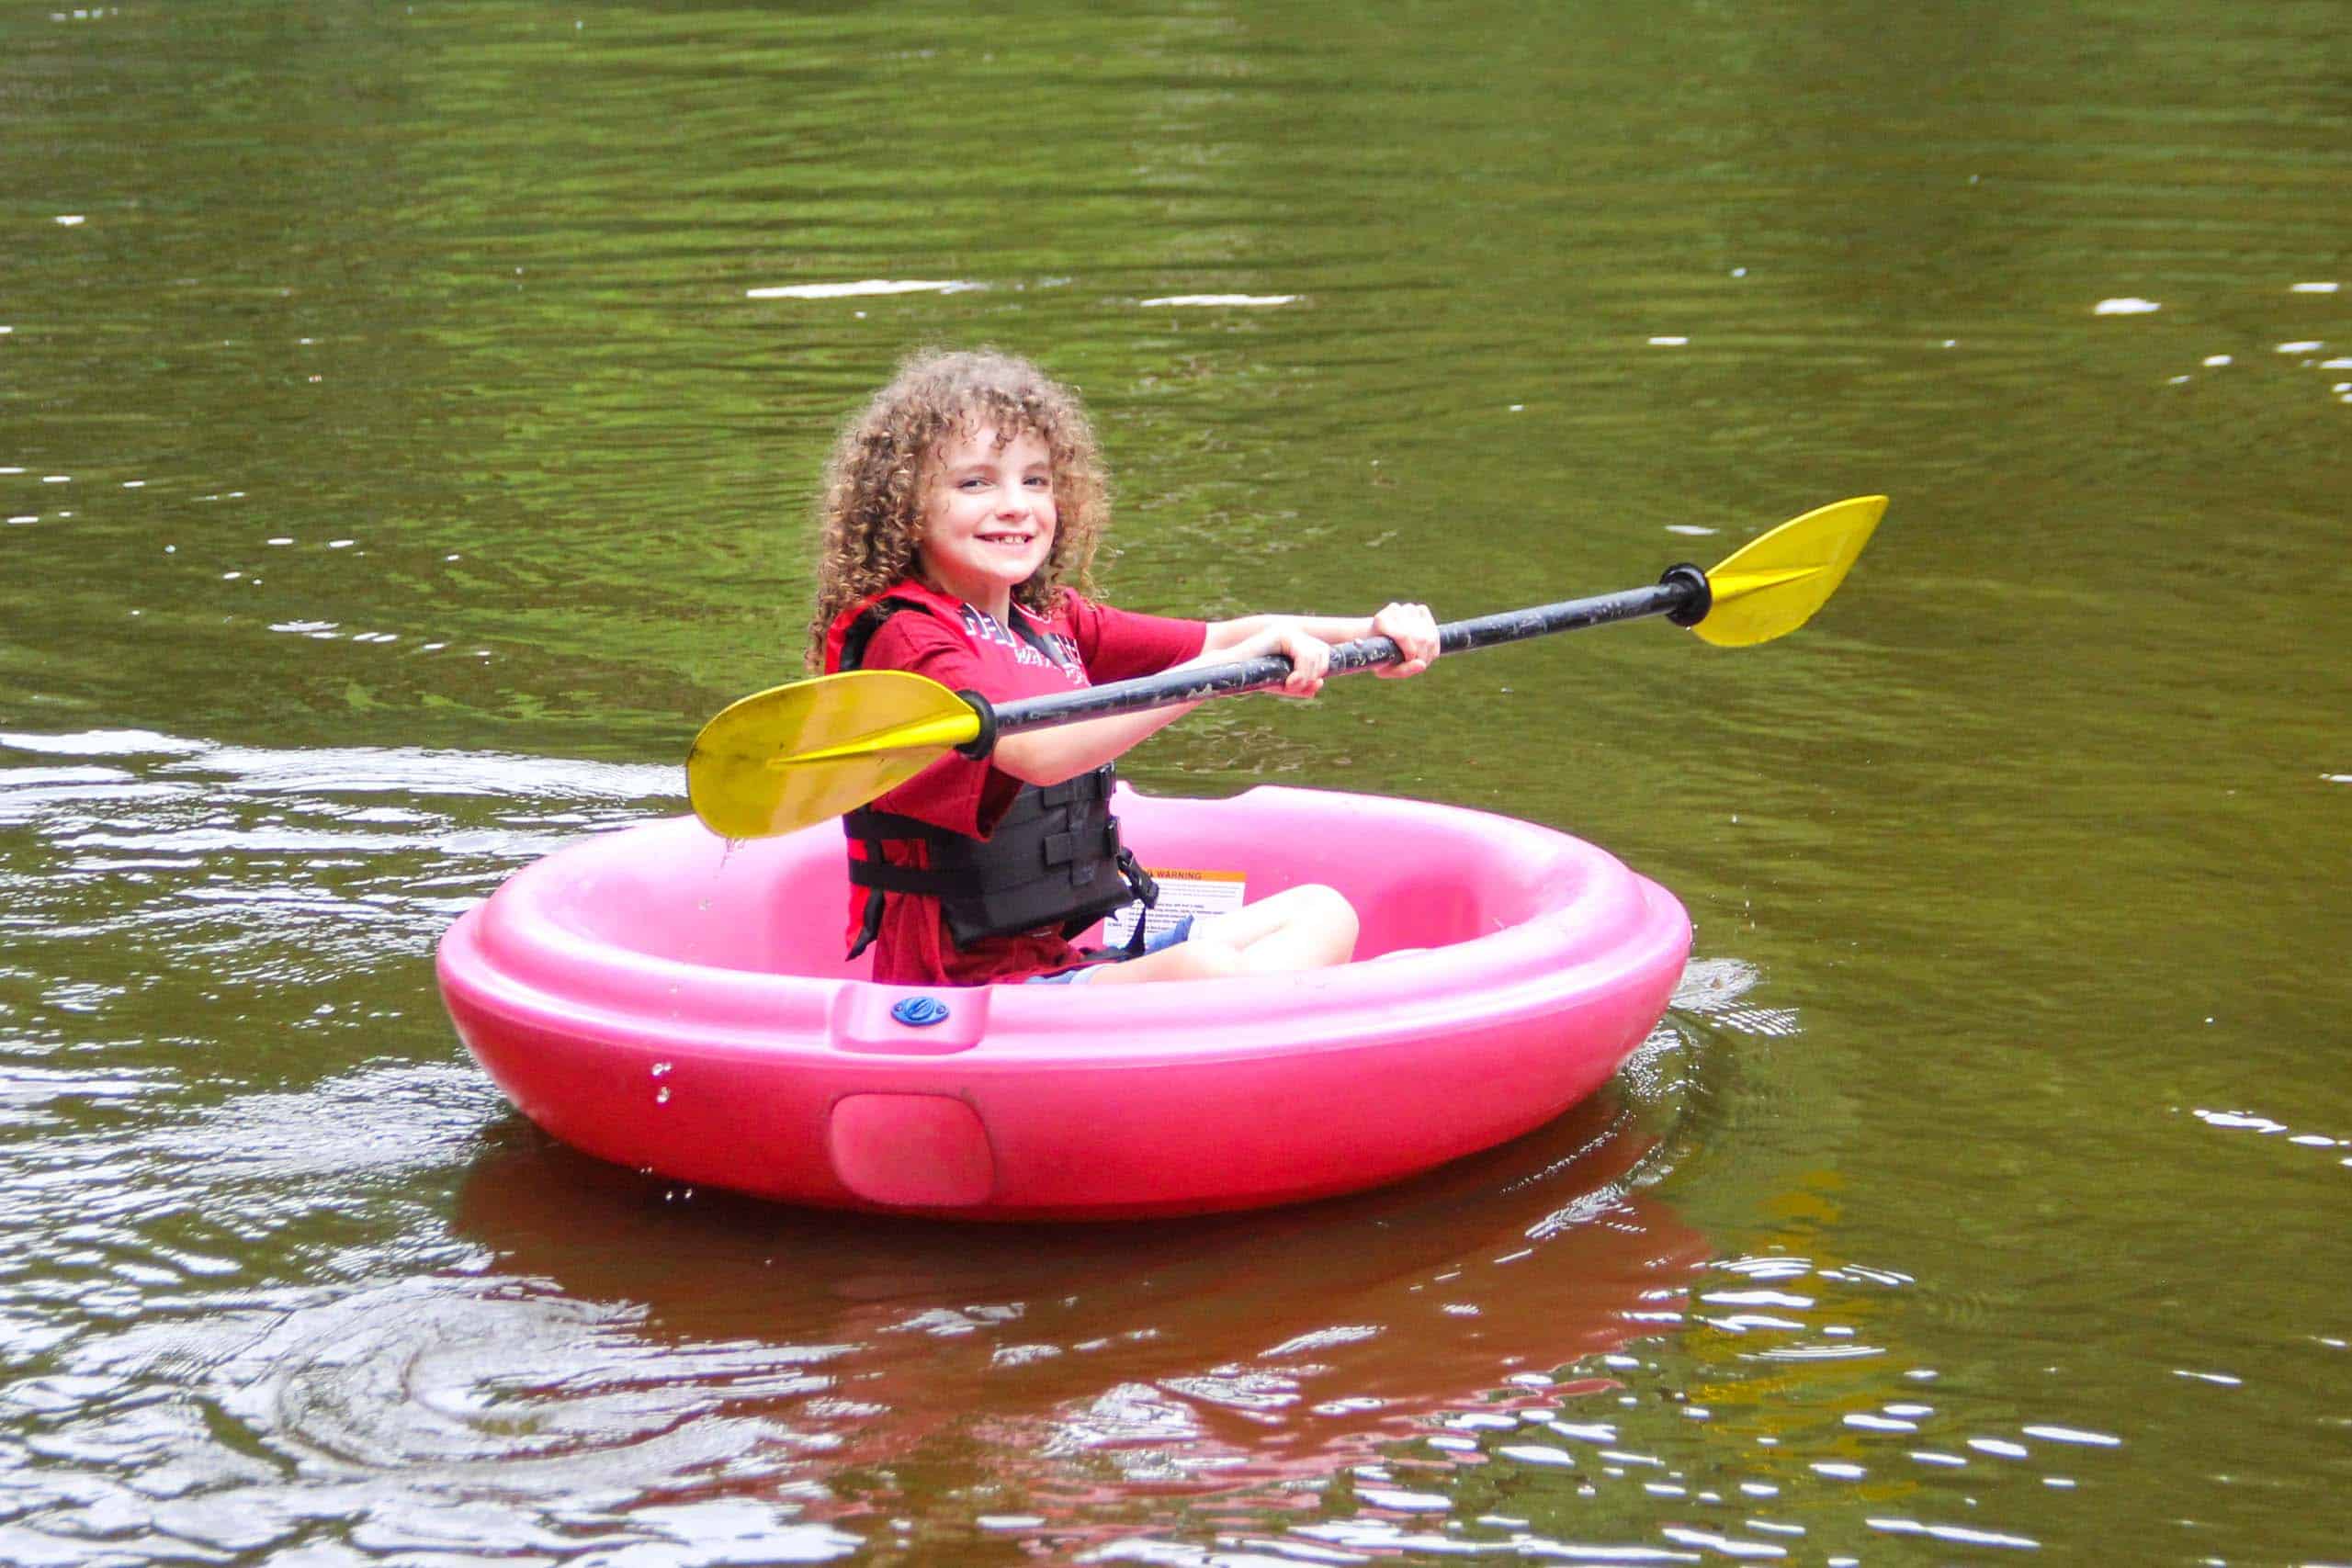 A kid at summer camp in Iowa floats on a pink raft in a body of water.